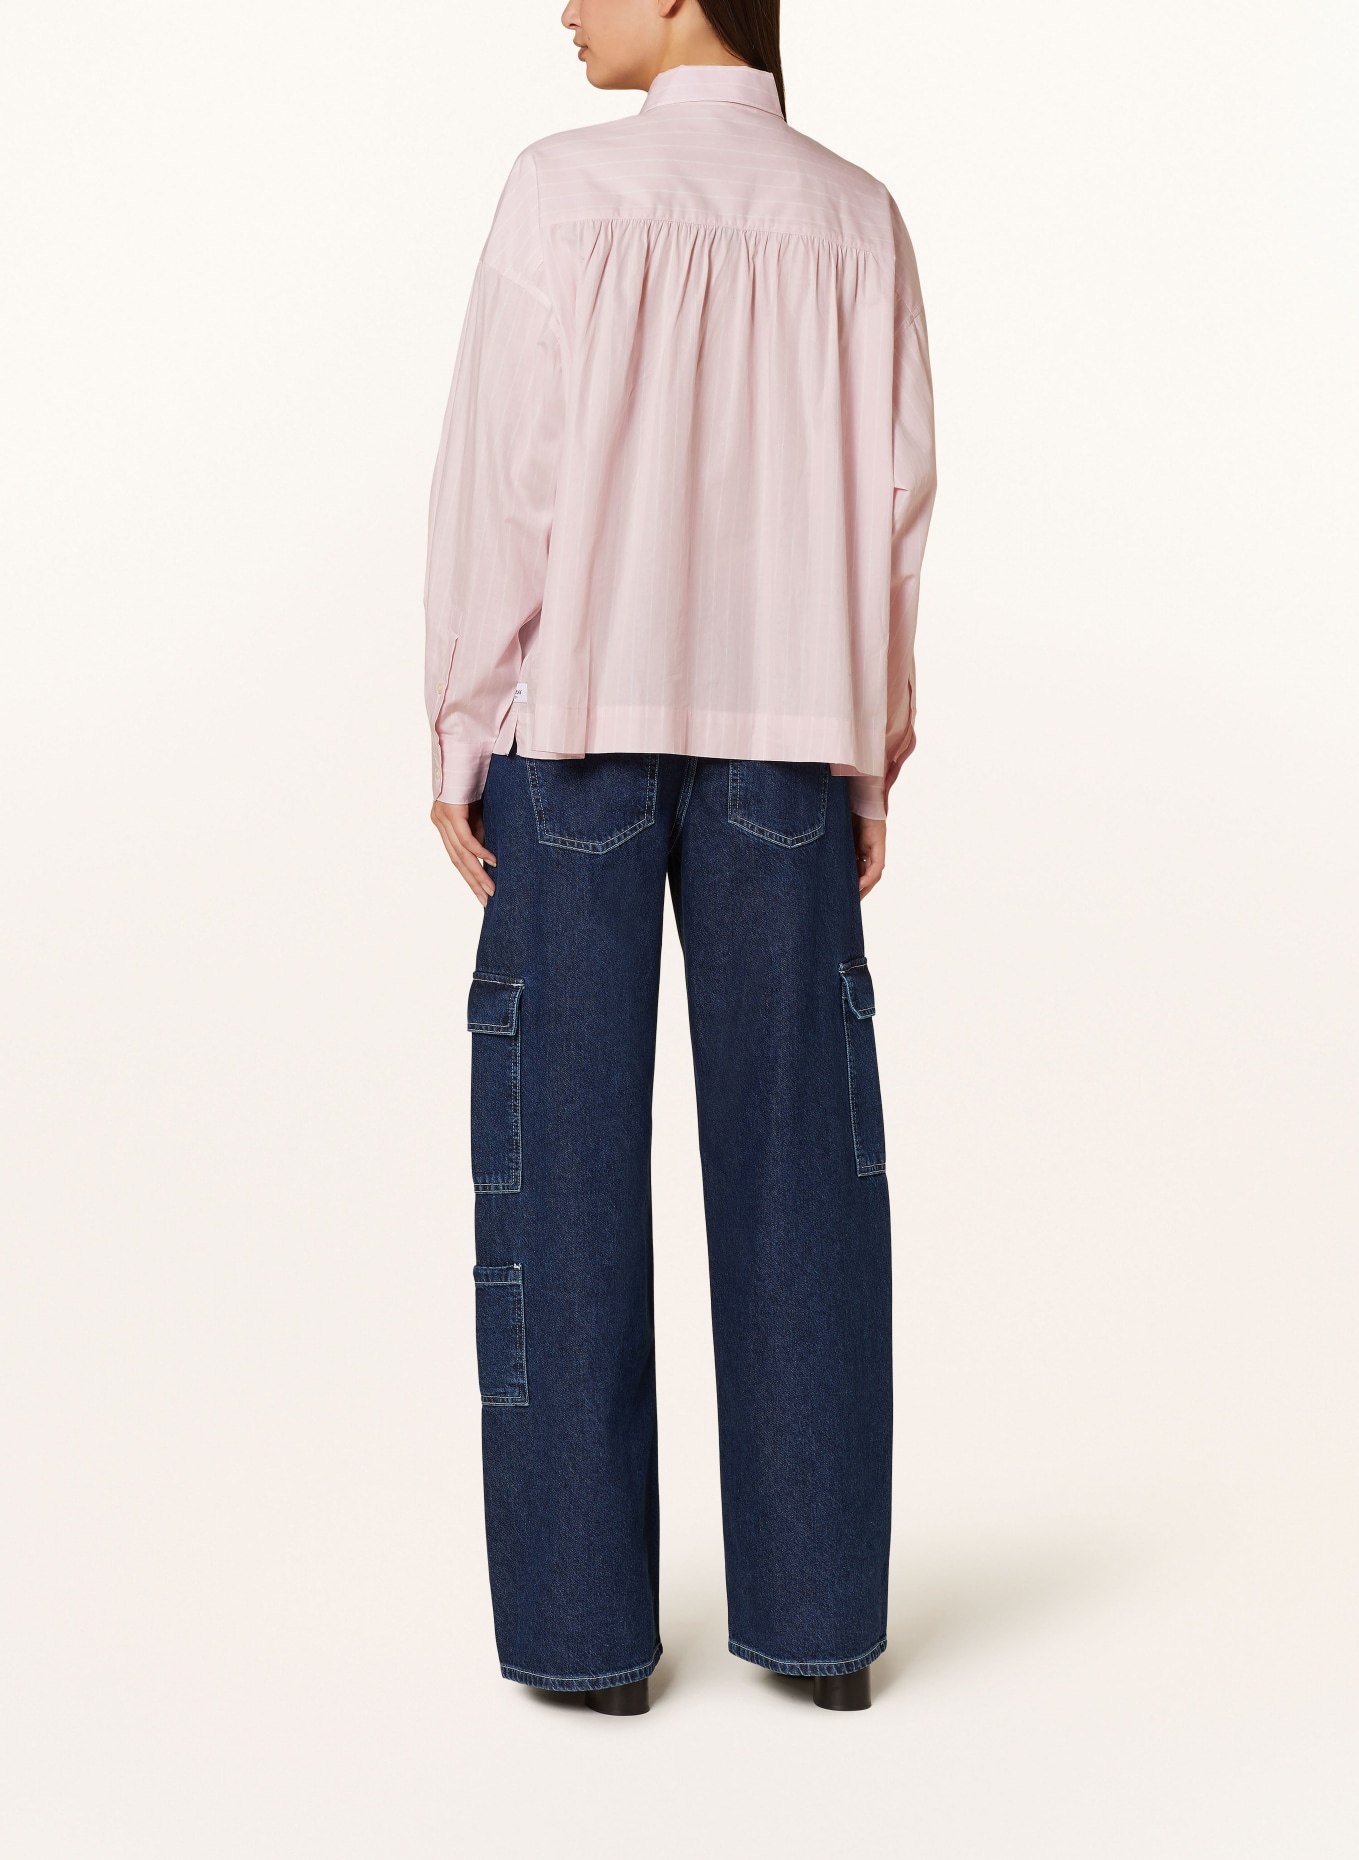 REPLAY Shirt blouse, Color: PINK/ WHITE (Image 3)